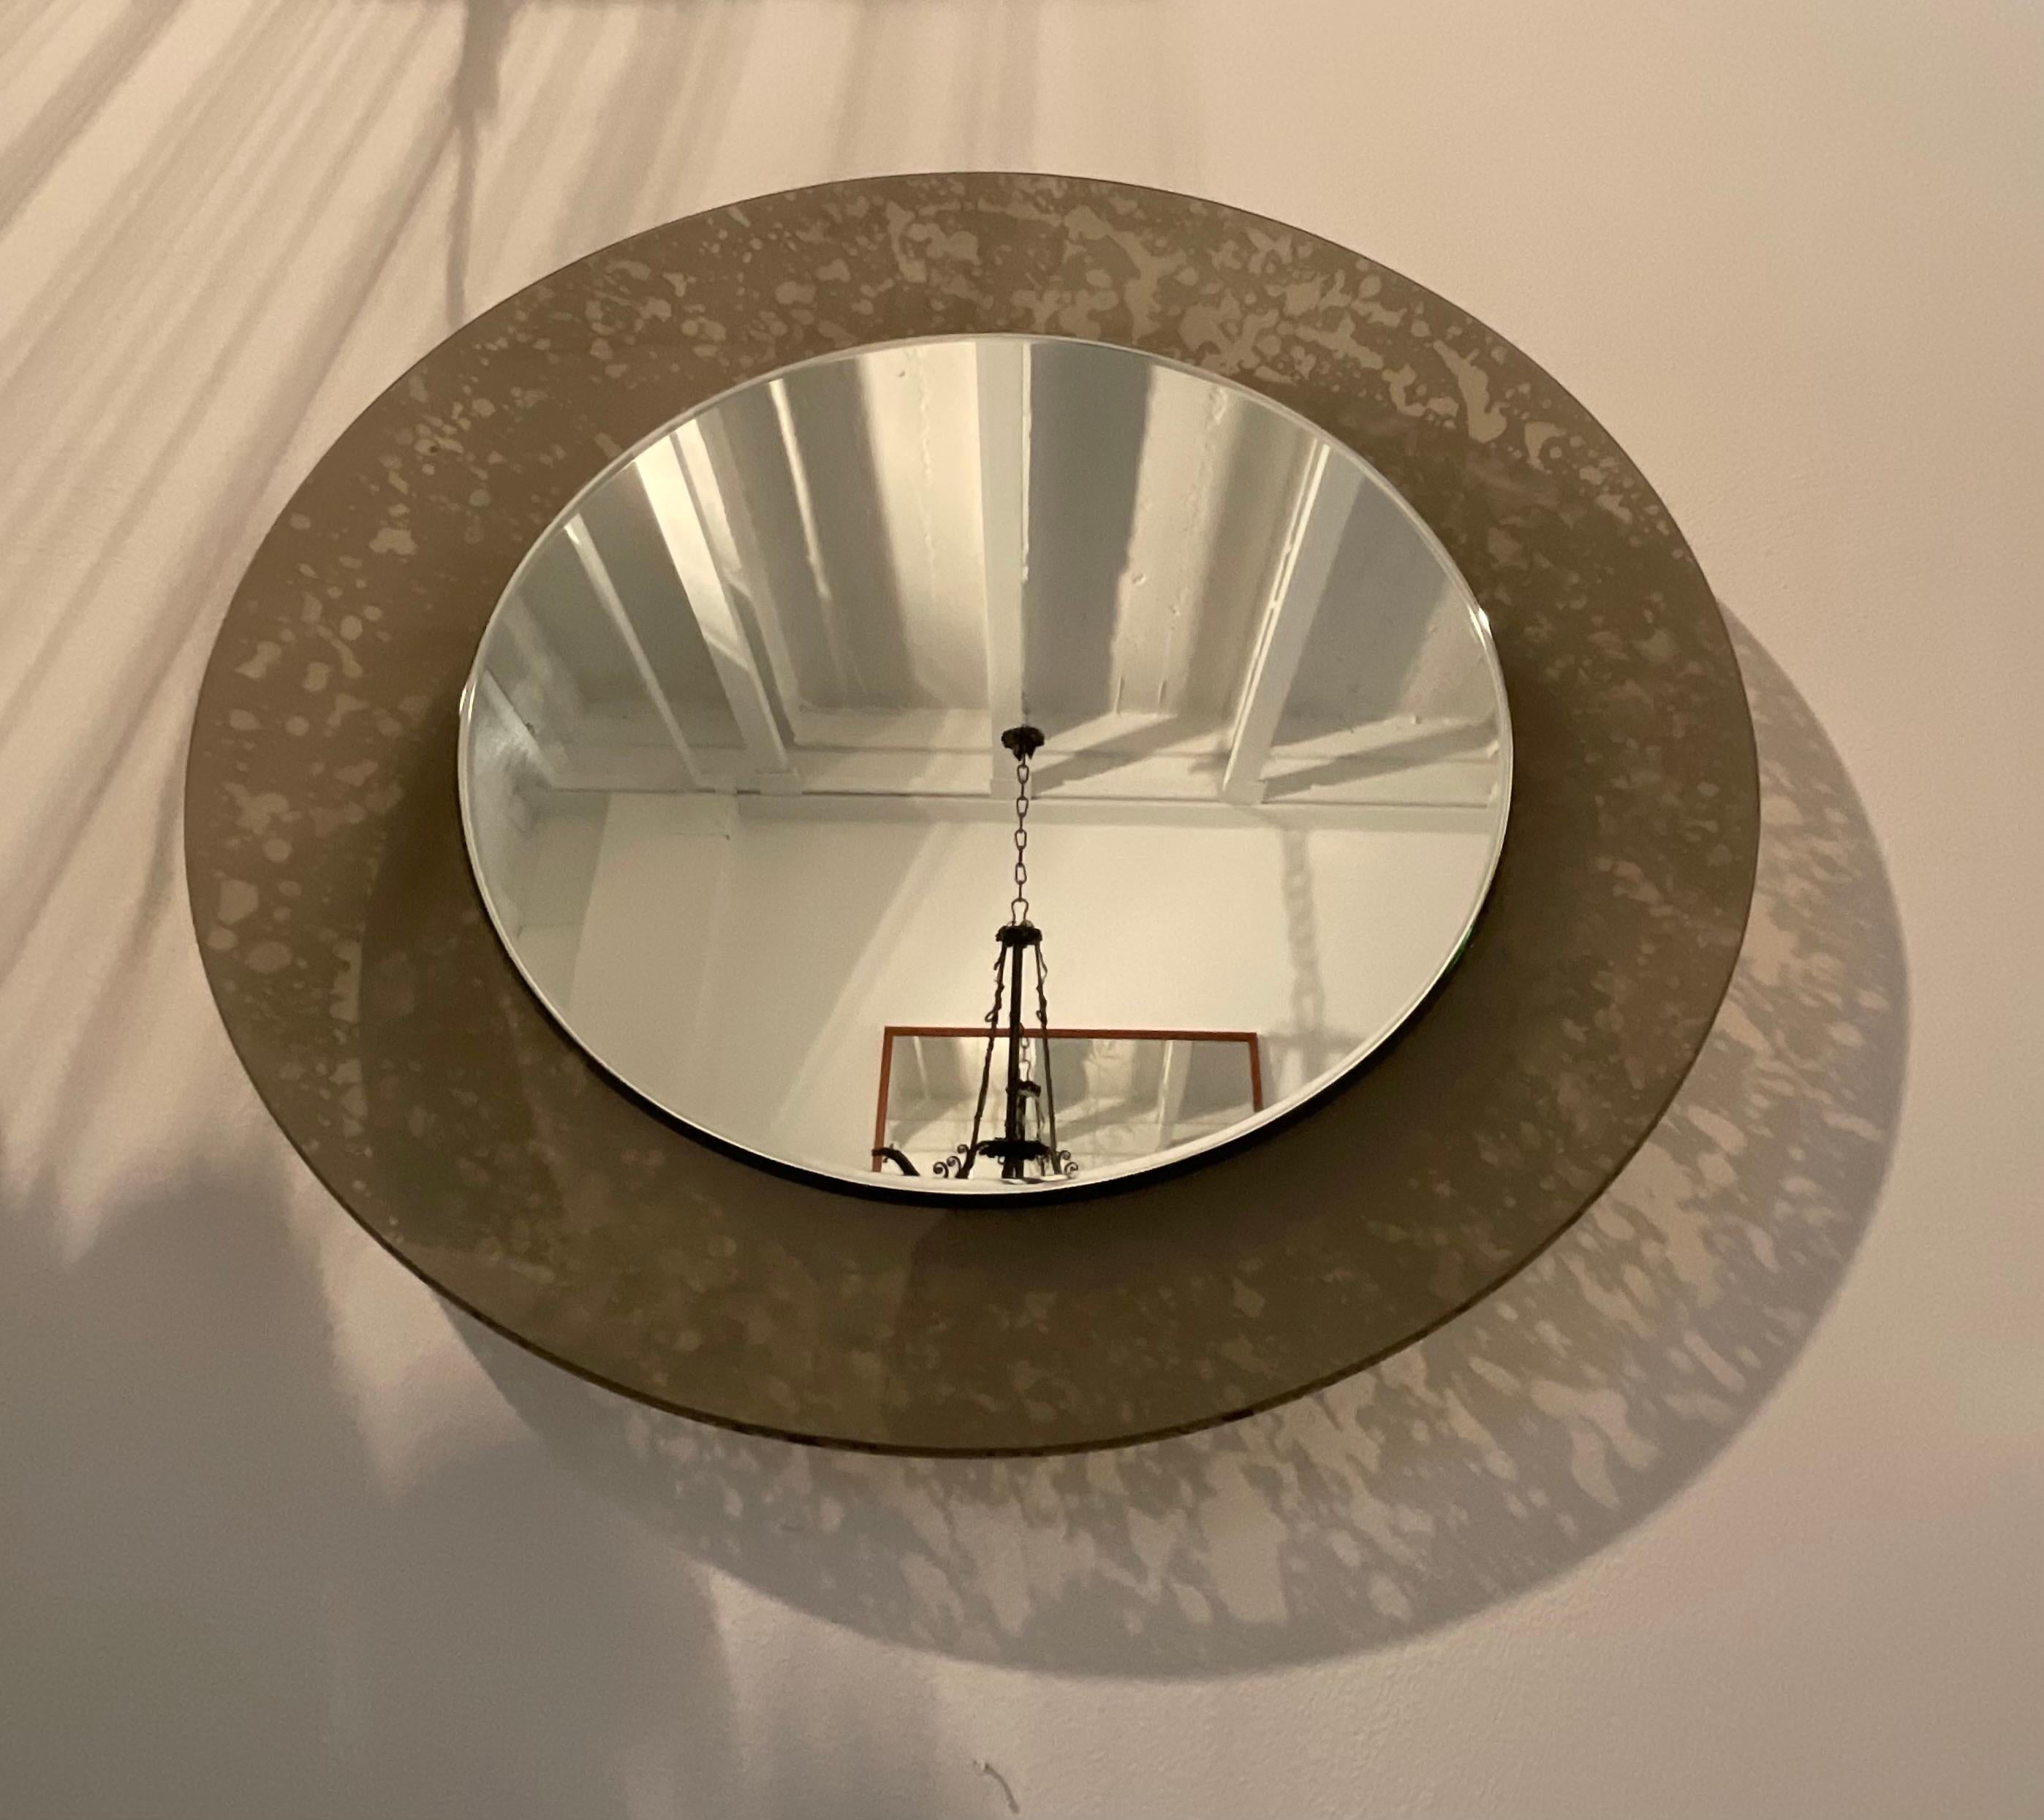 Italian FONTANARTE - Erwing BURGER - Hanging mirror - curved and etched glass. For Sale